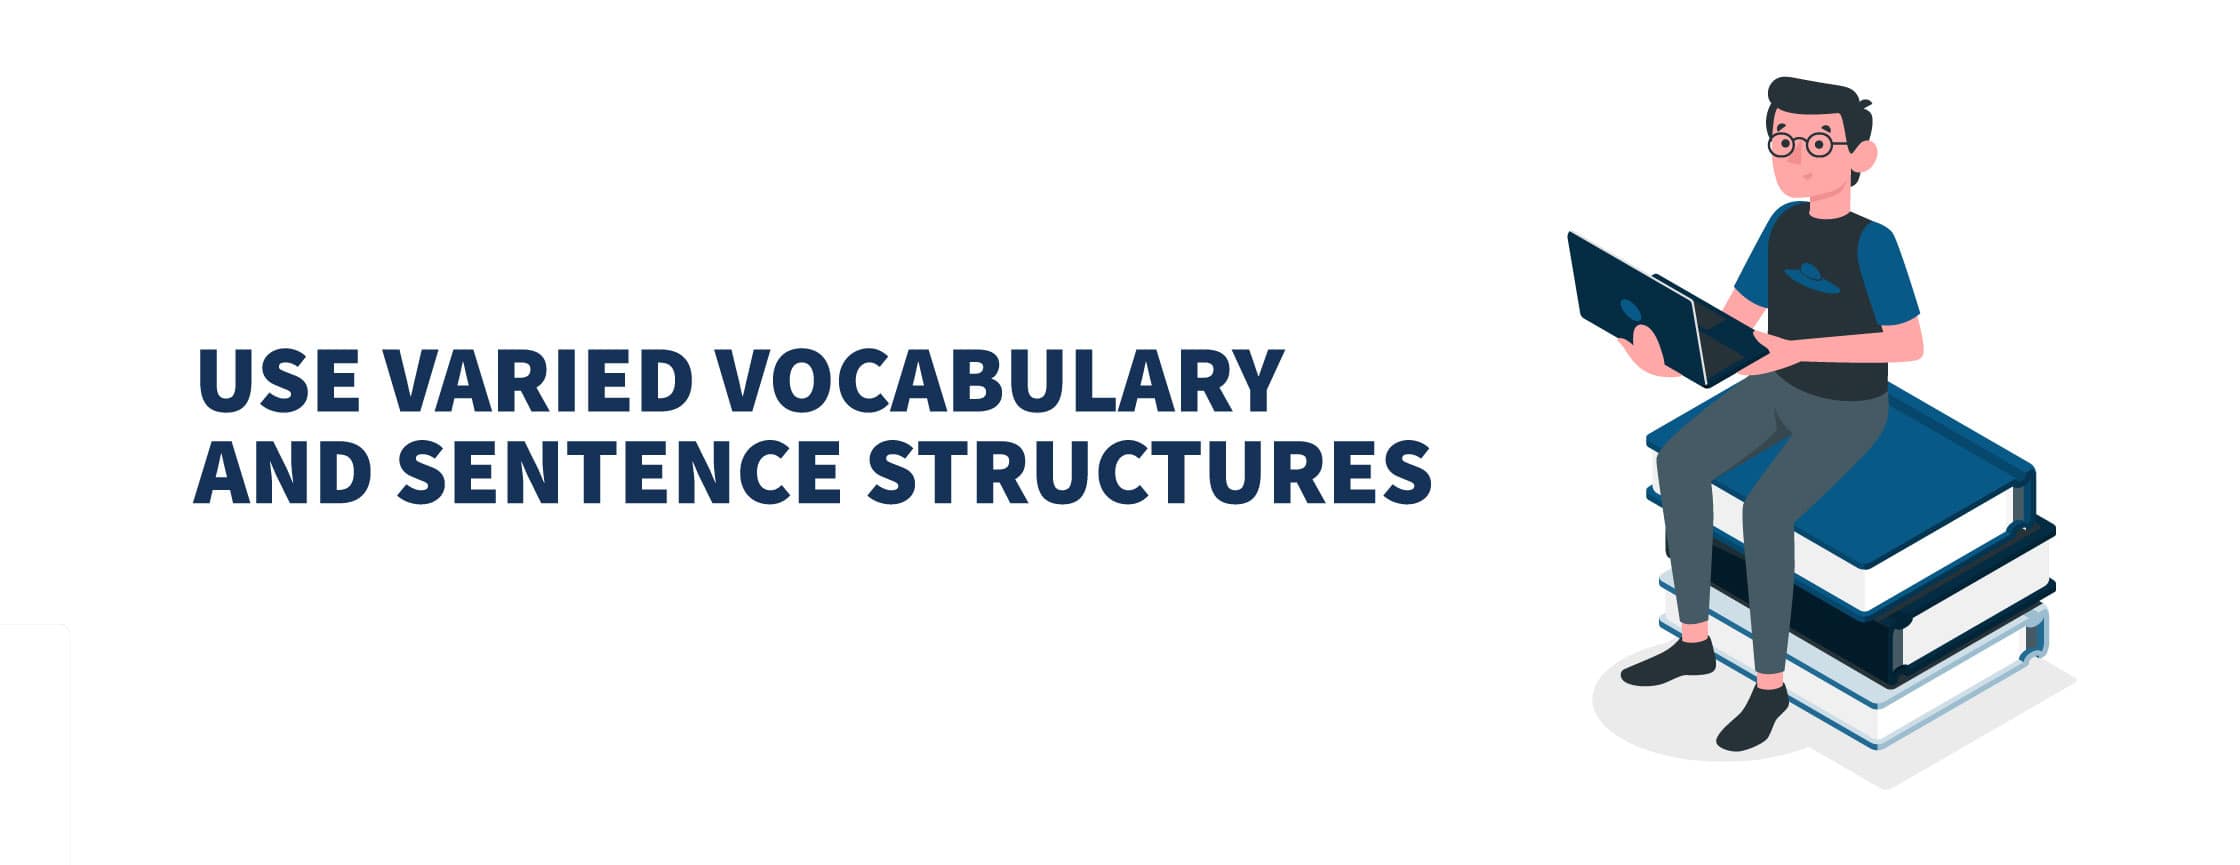 Use Varied Vocabulary and Sentence Structures: